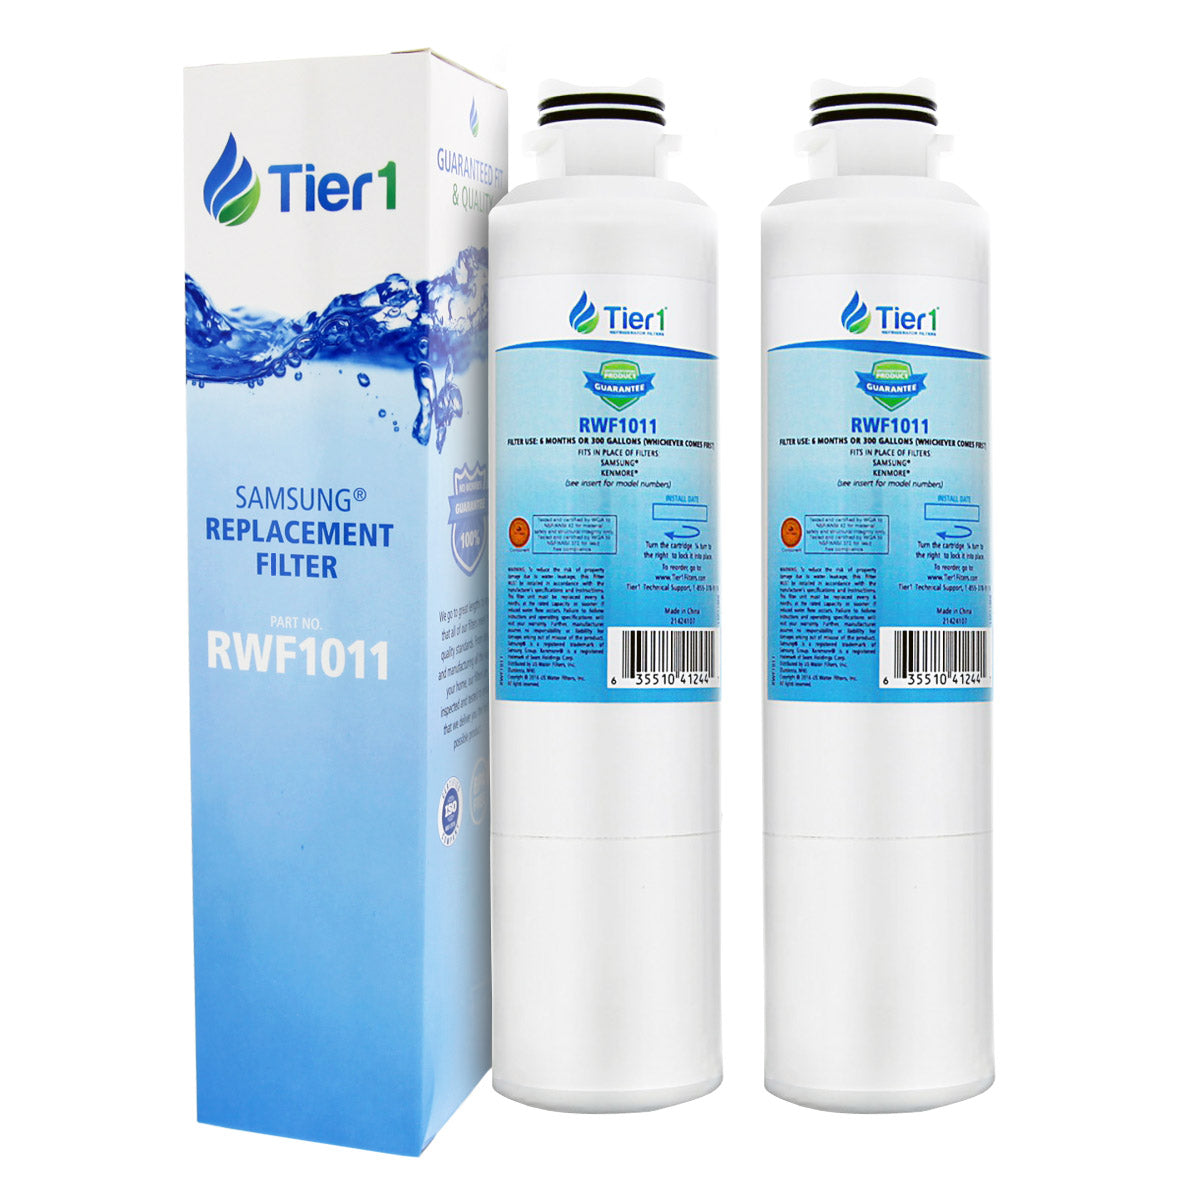 Tier1 Samsung DA29-00020B Refrigerator Water Filter Replacement Comparable